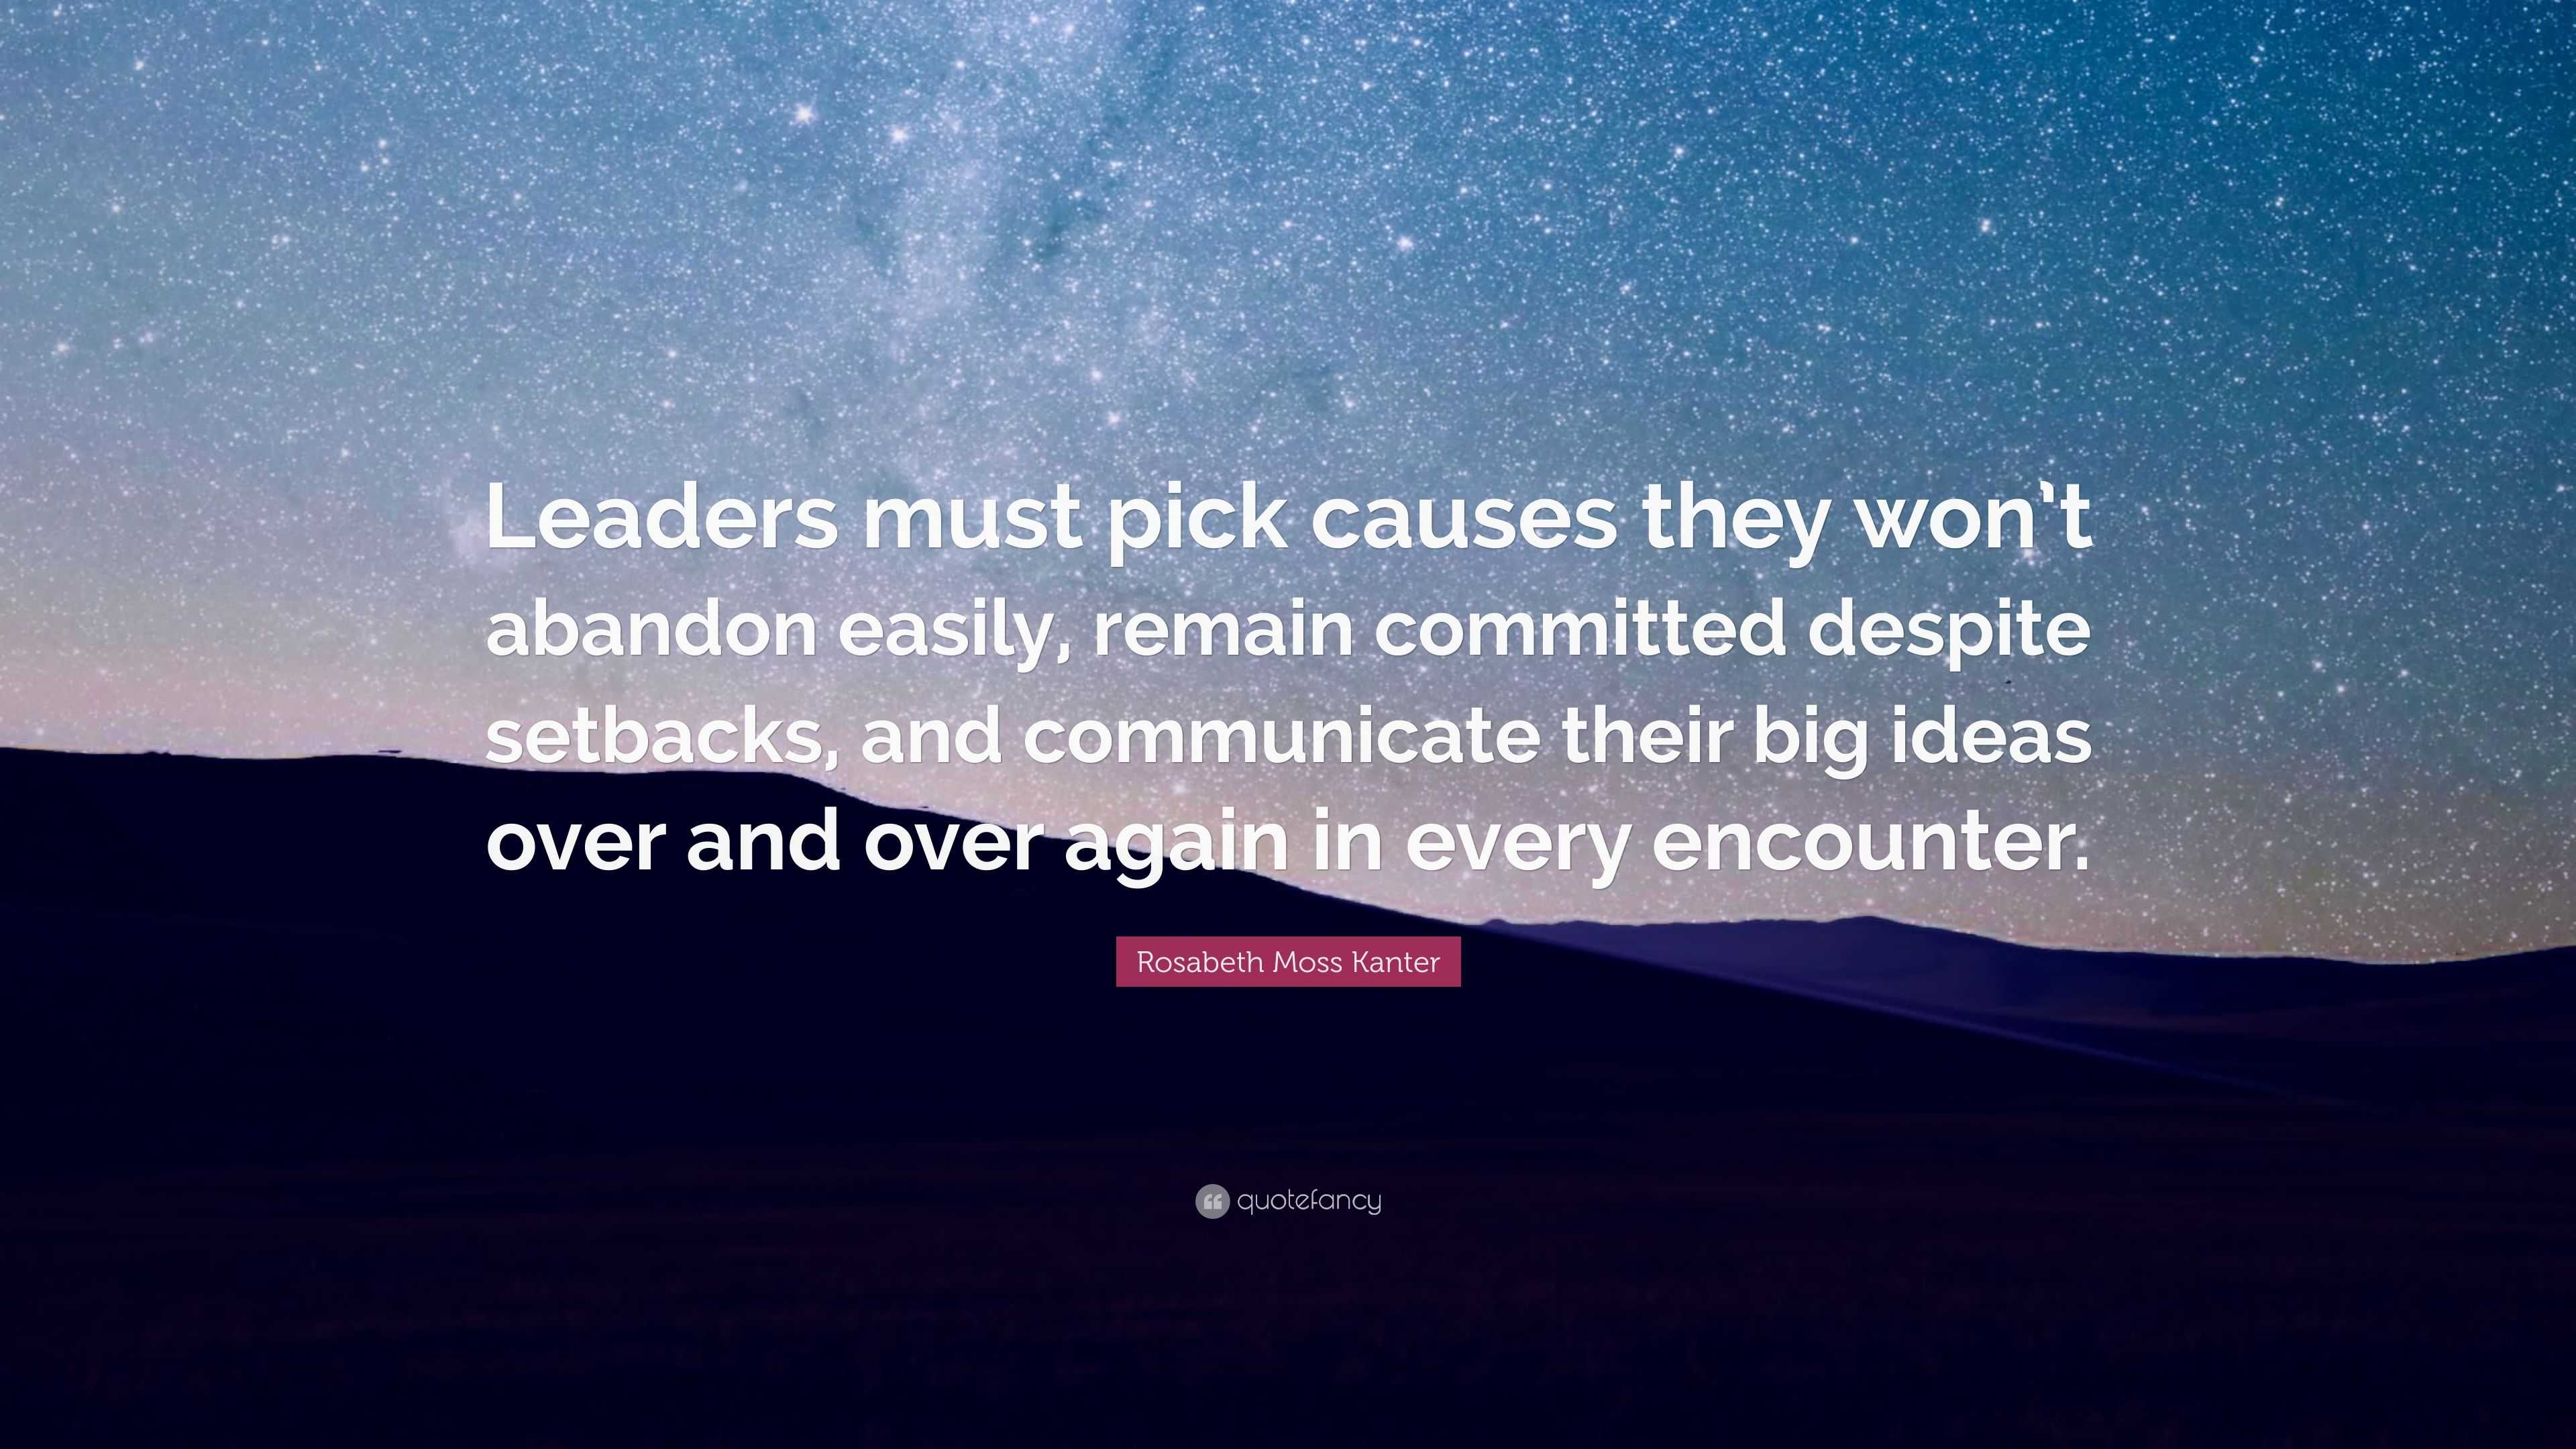 Rosabeth Moss Kanter Quote “leaders Must Pick Causes They Won’t Abandon Easily Remain